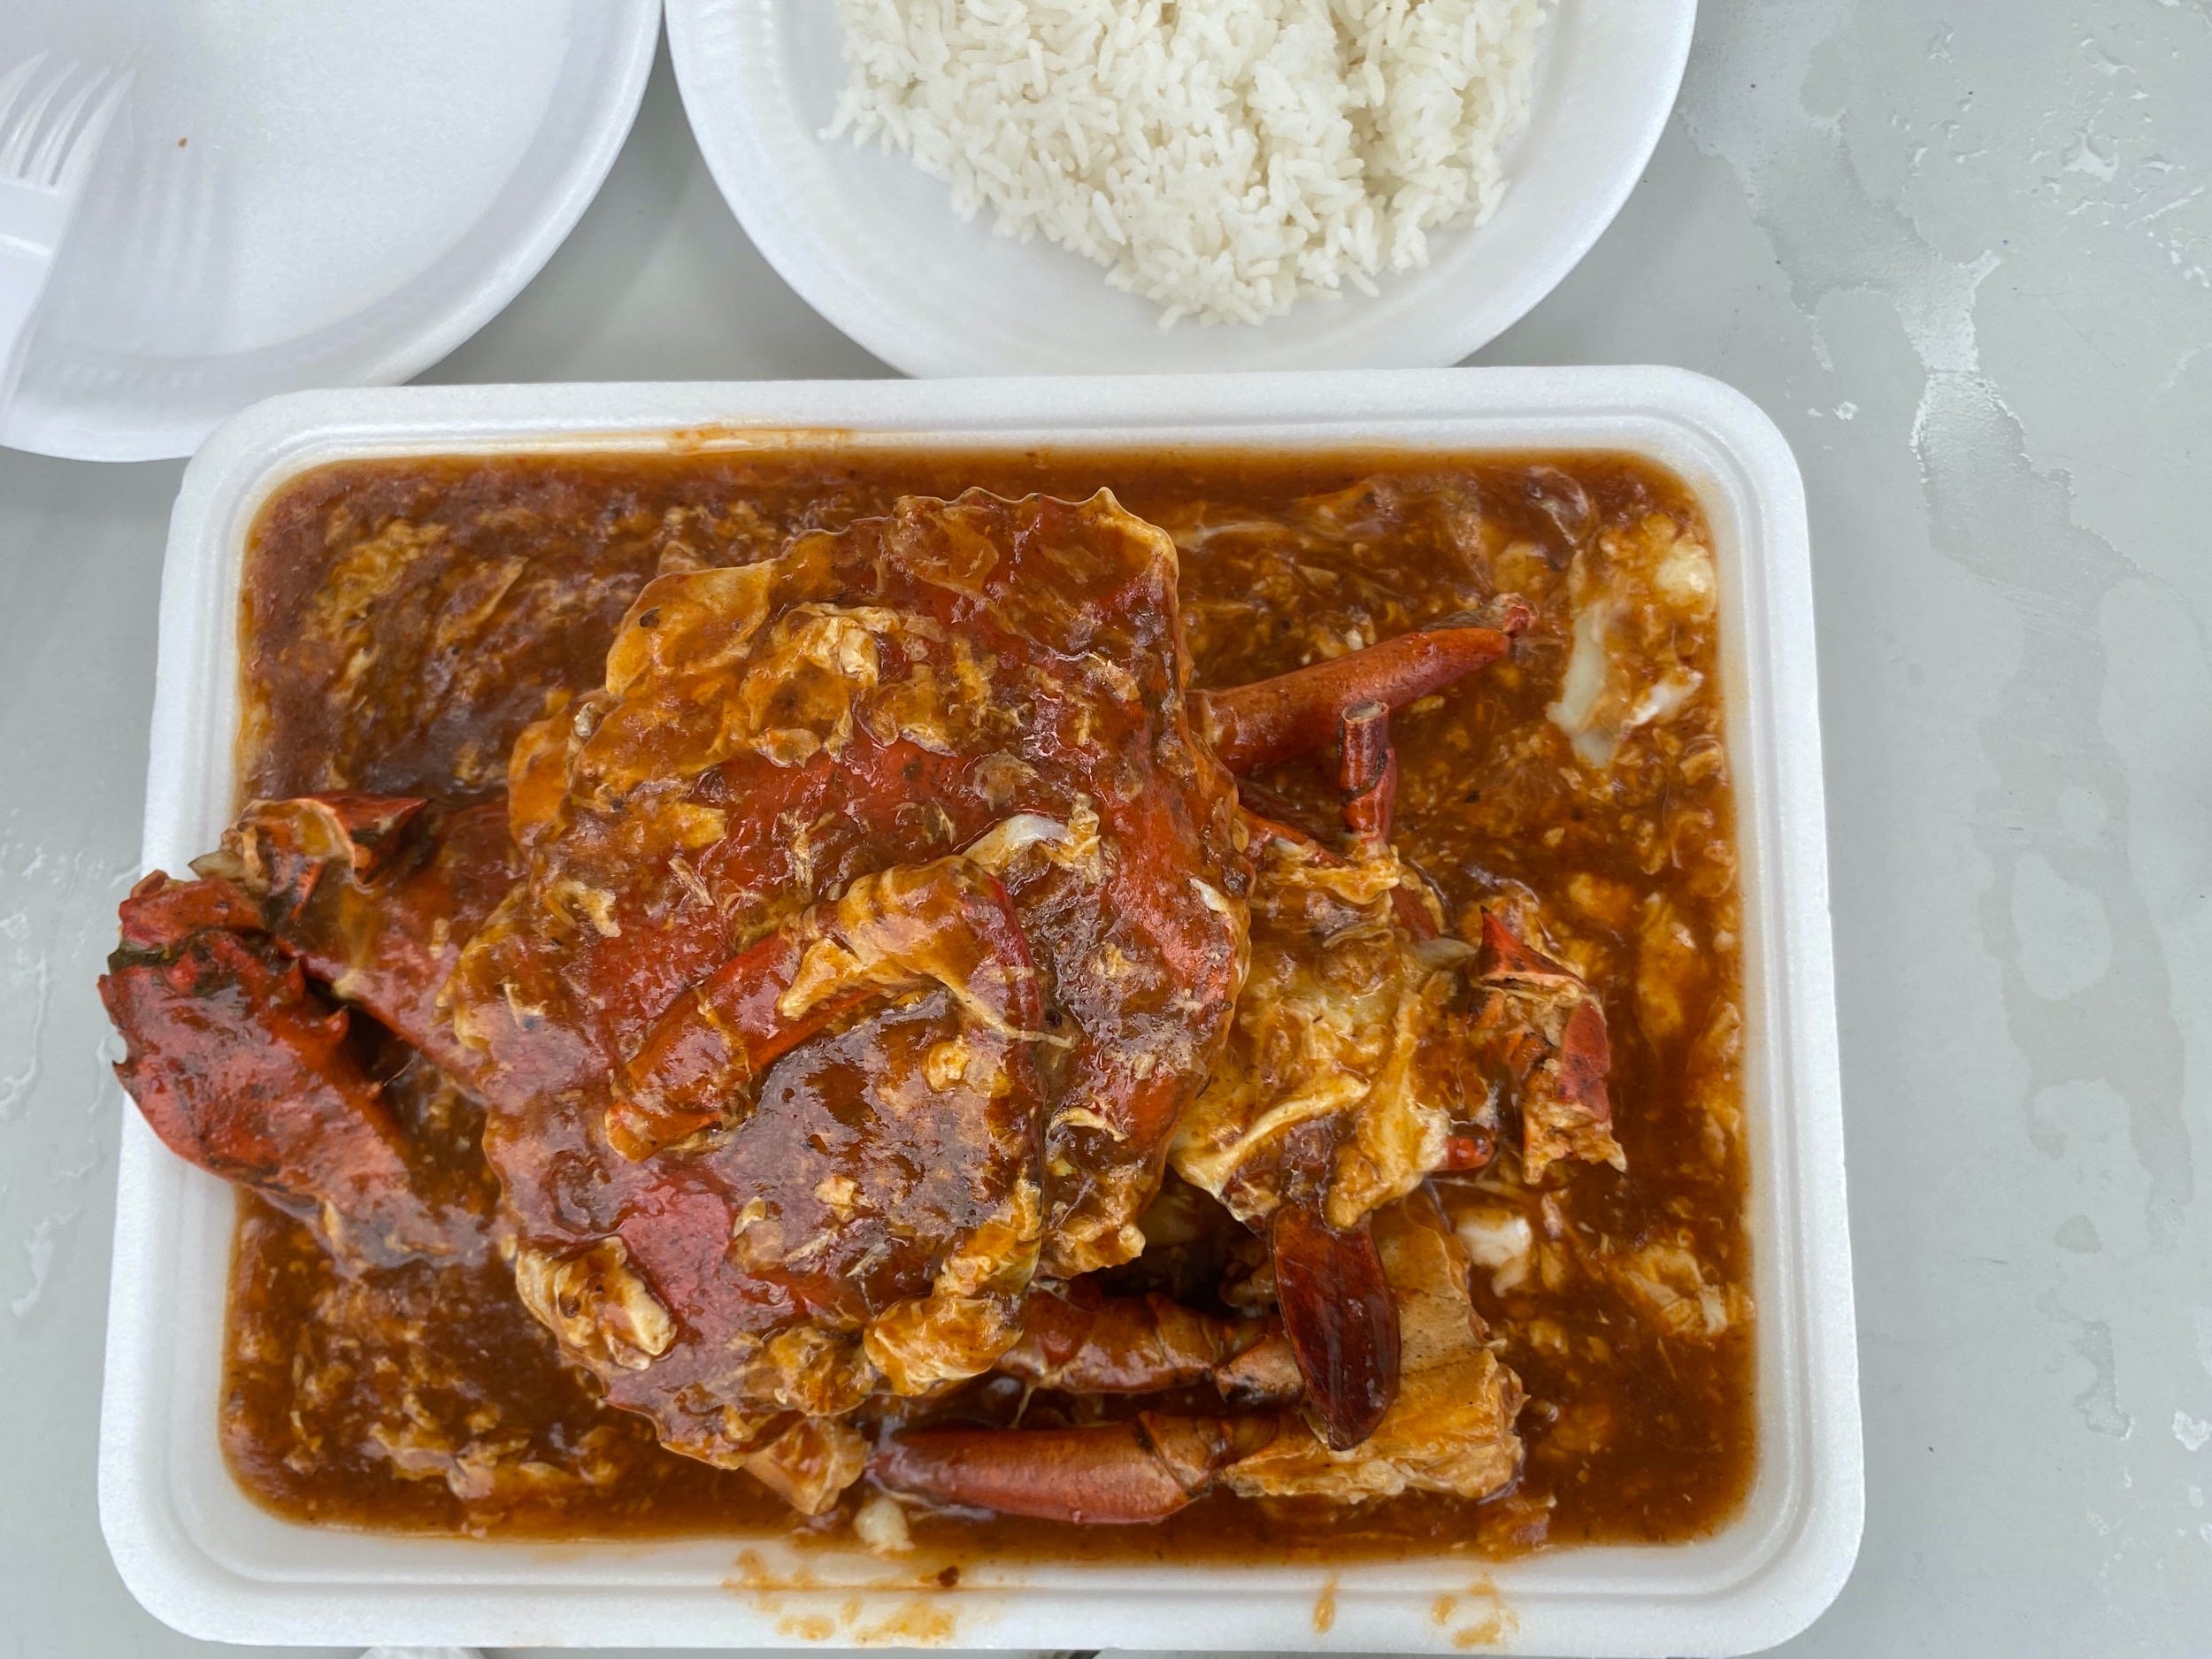 a paper plate of chili crab with white rice at a hawker center in singapore